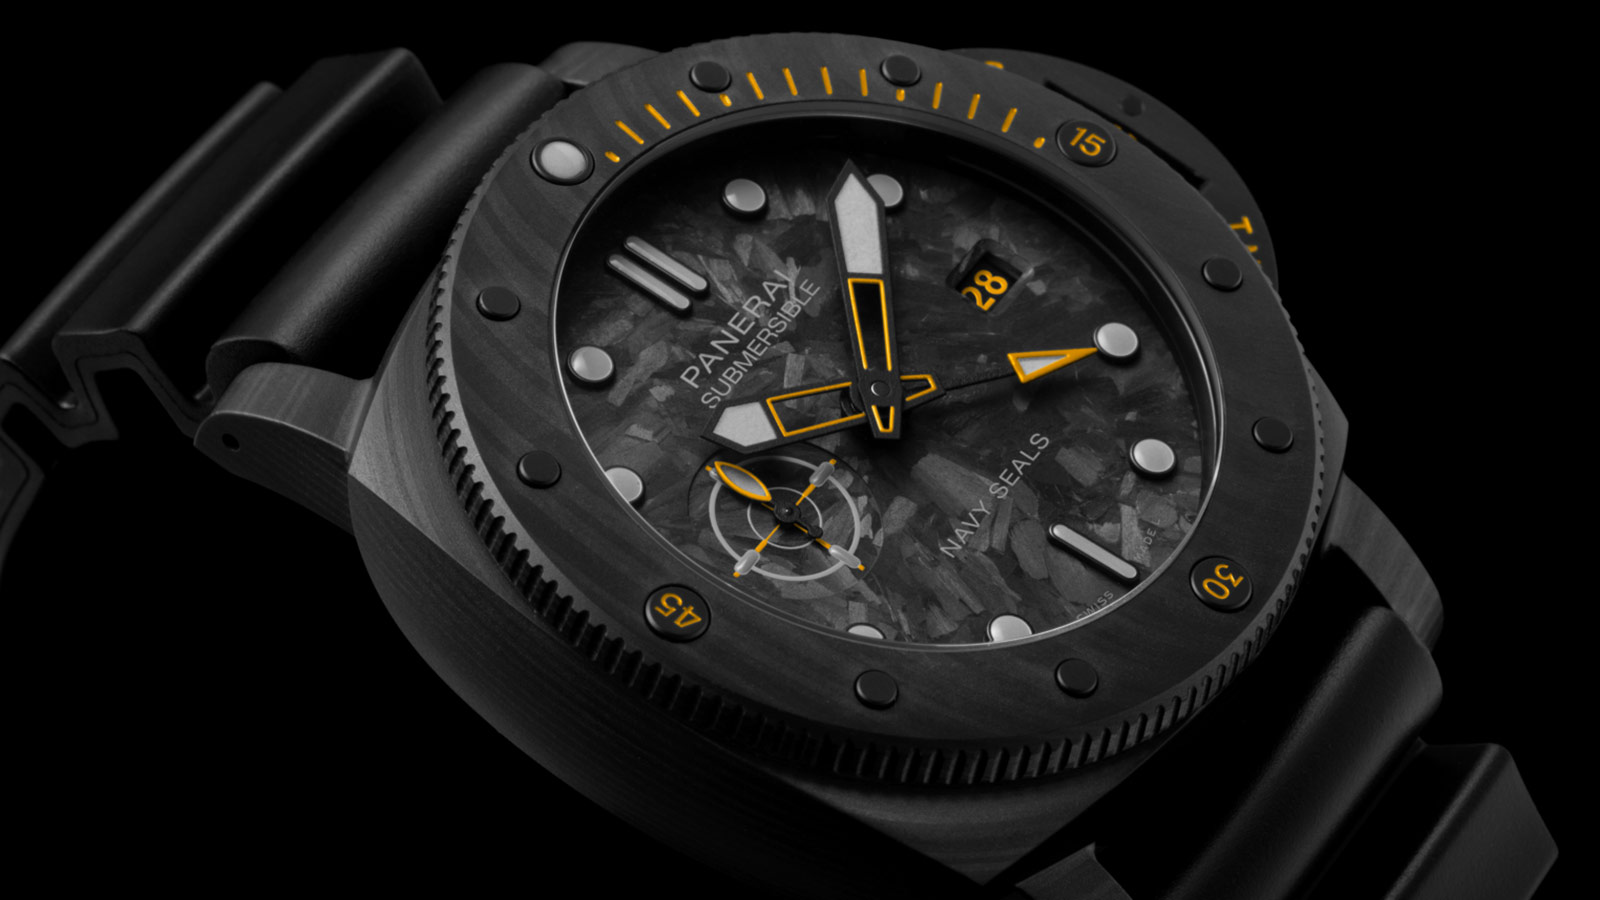 Panerai Submersible GMT Carbotech Navy SEALs Limited Edition